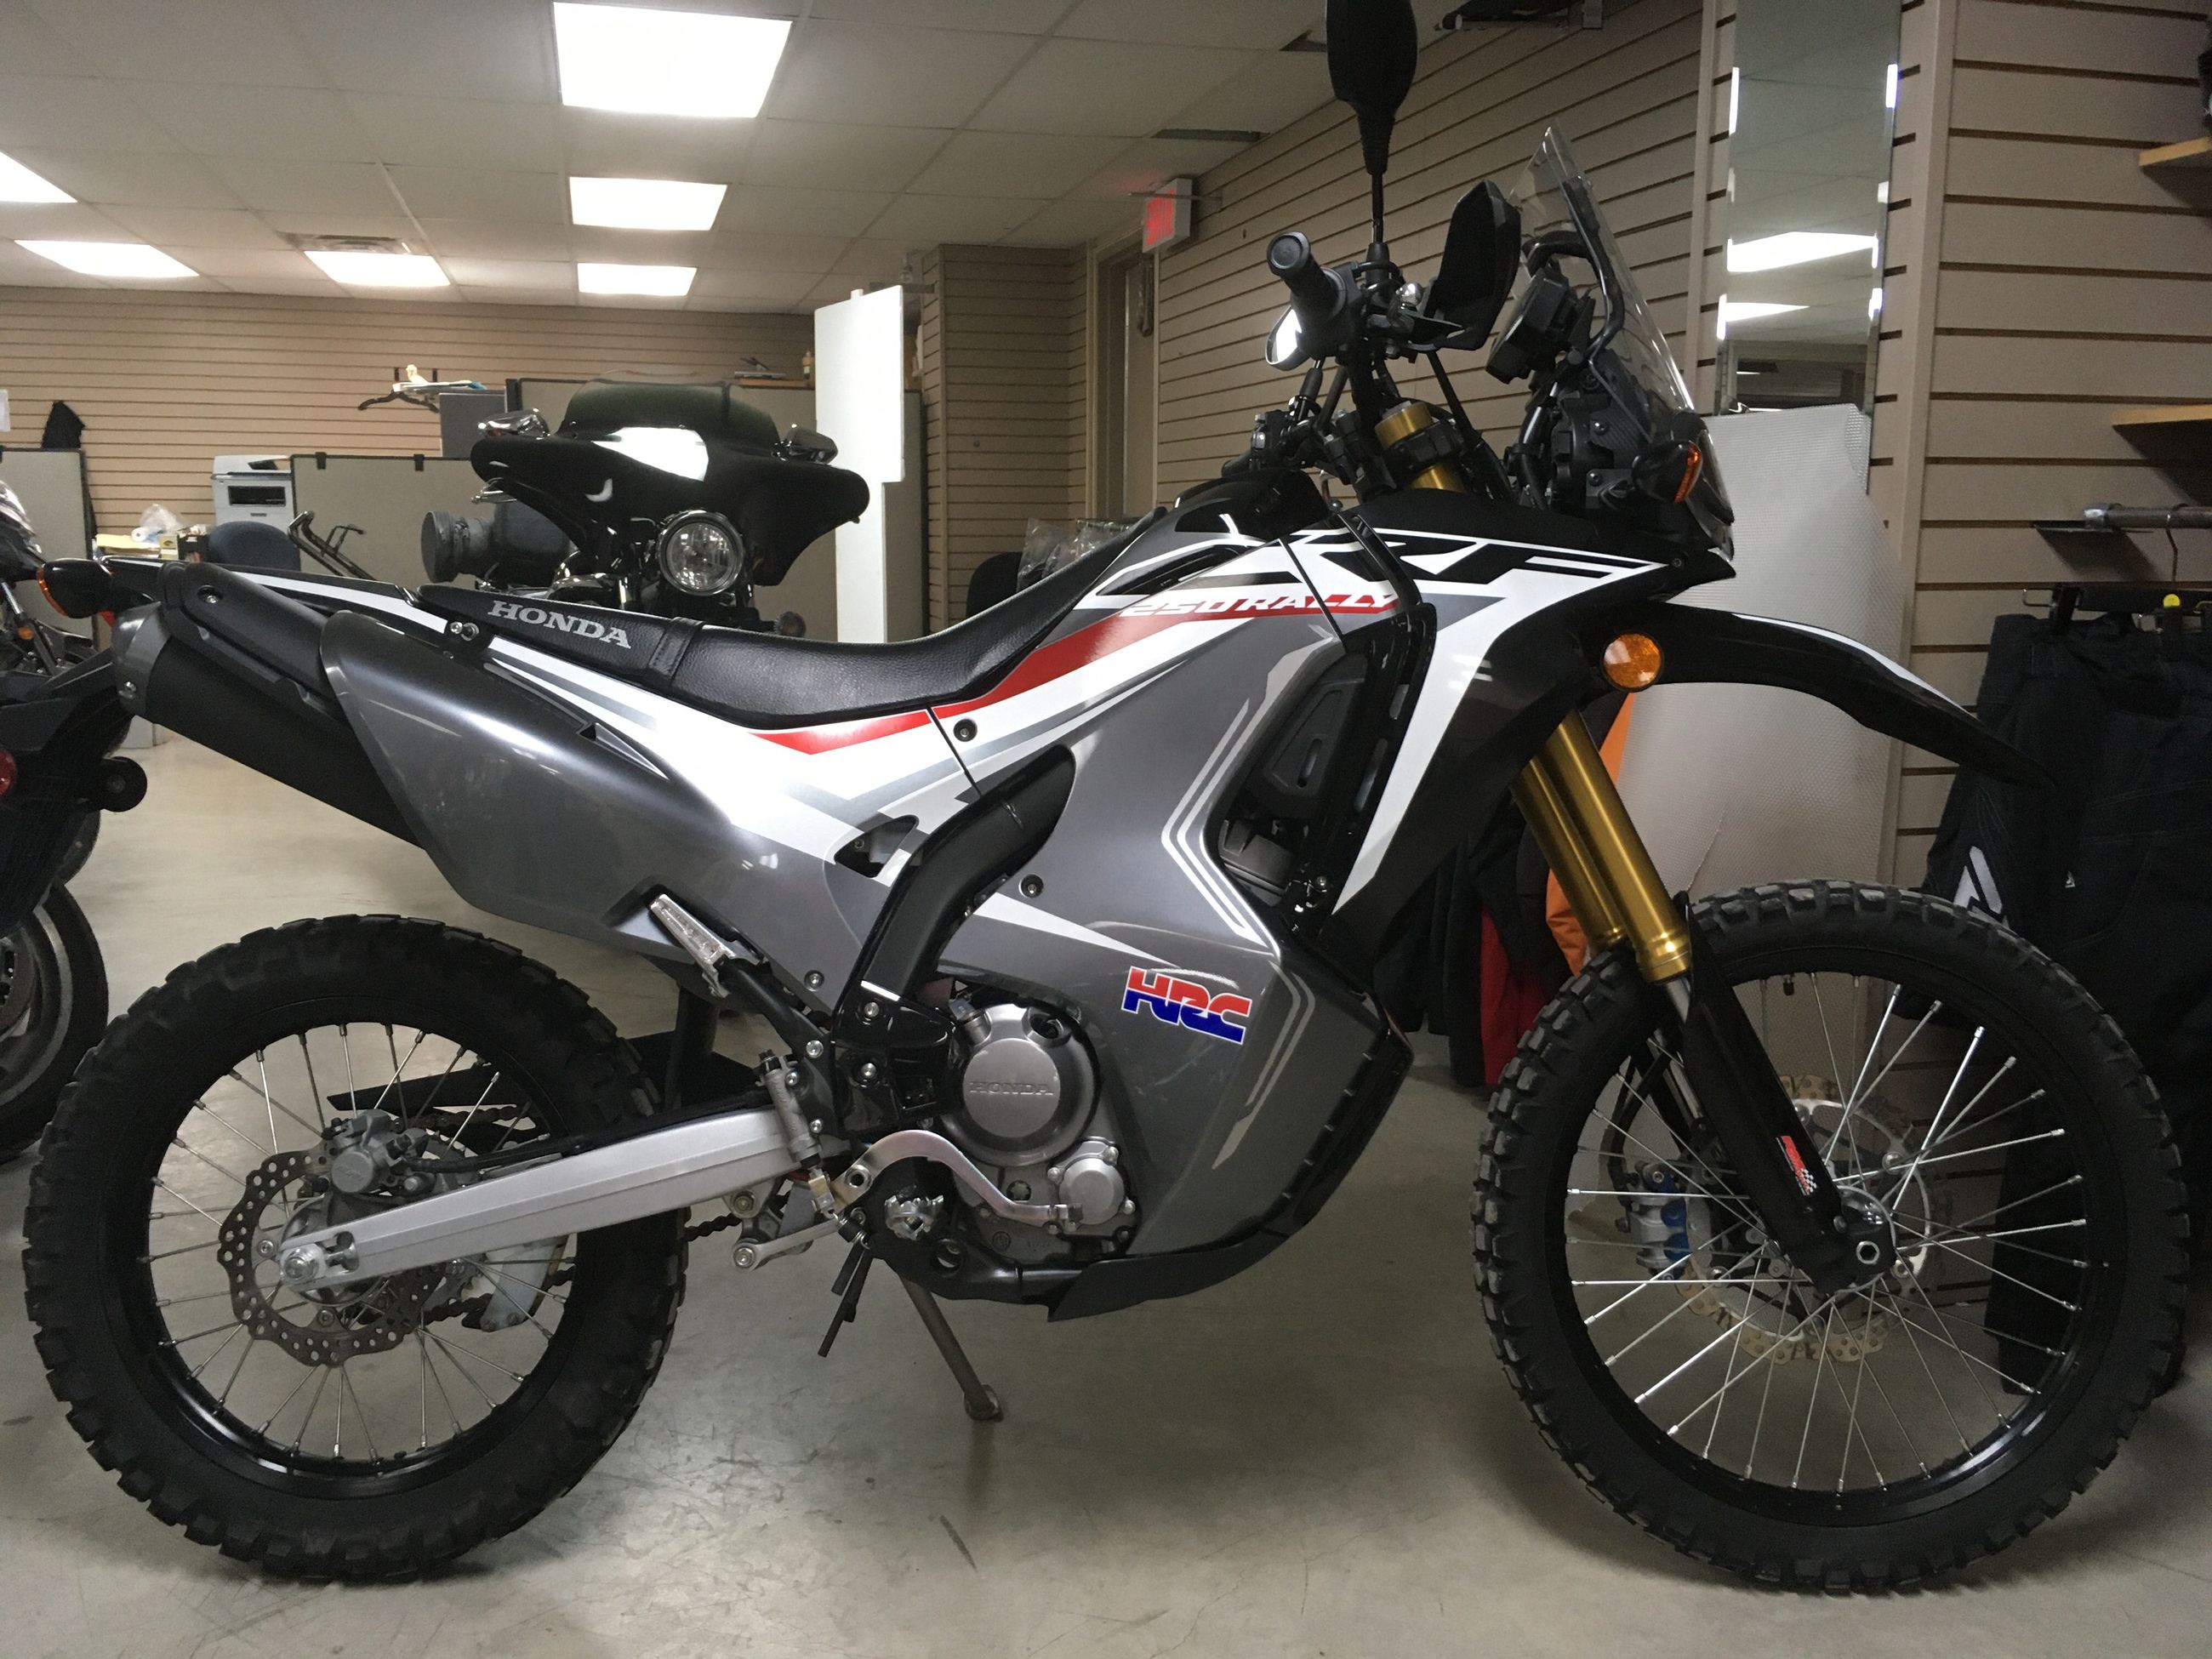 Rm Motosport In Victoriaville Pre Owned 18 Honda Crf250 Rally For Sale